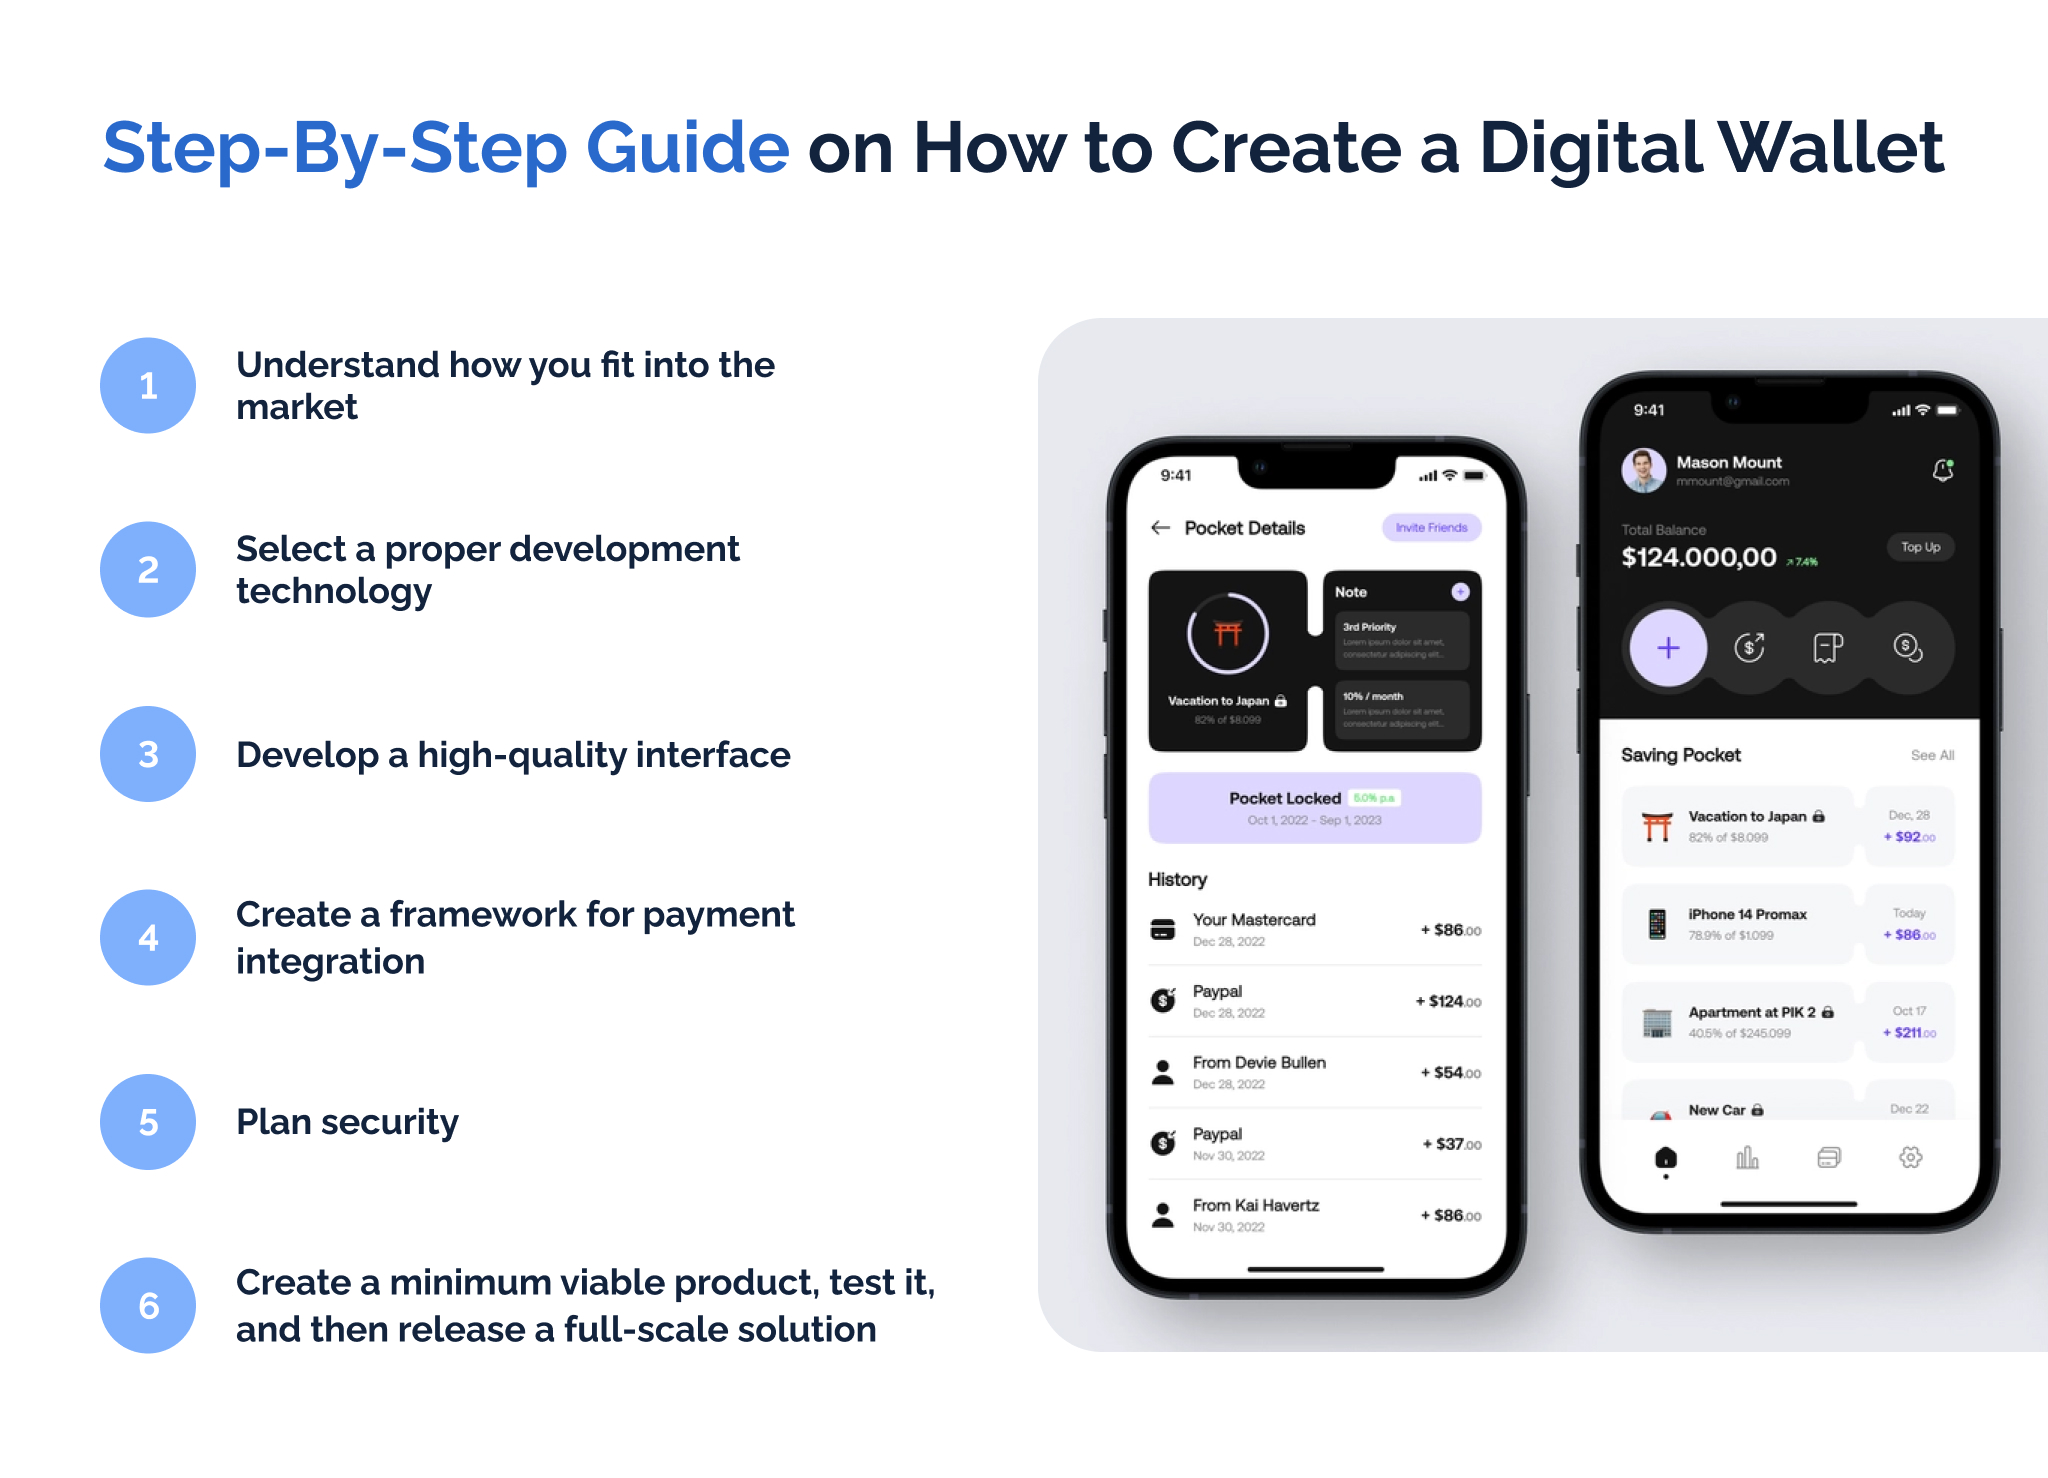 Step-By-Step Guide on How to Create a Digital Wallet